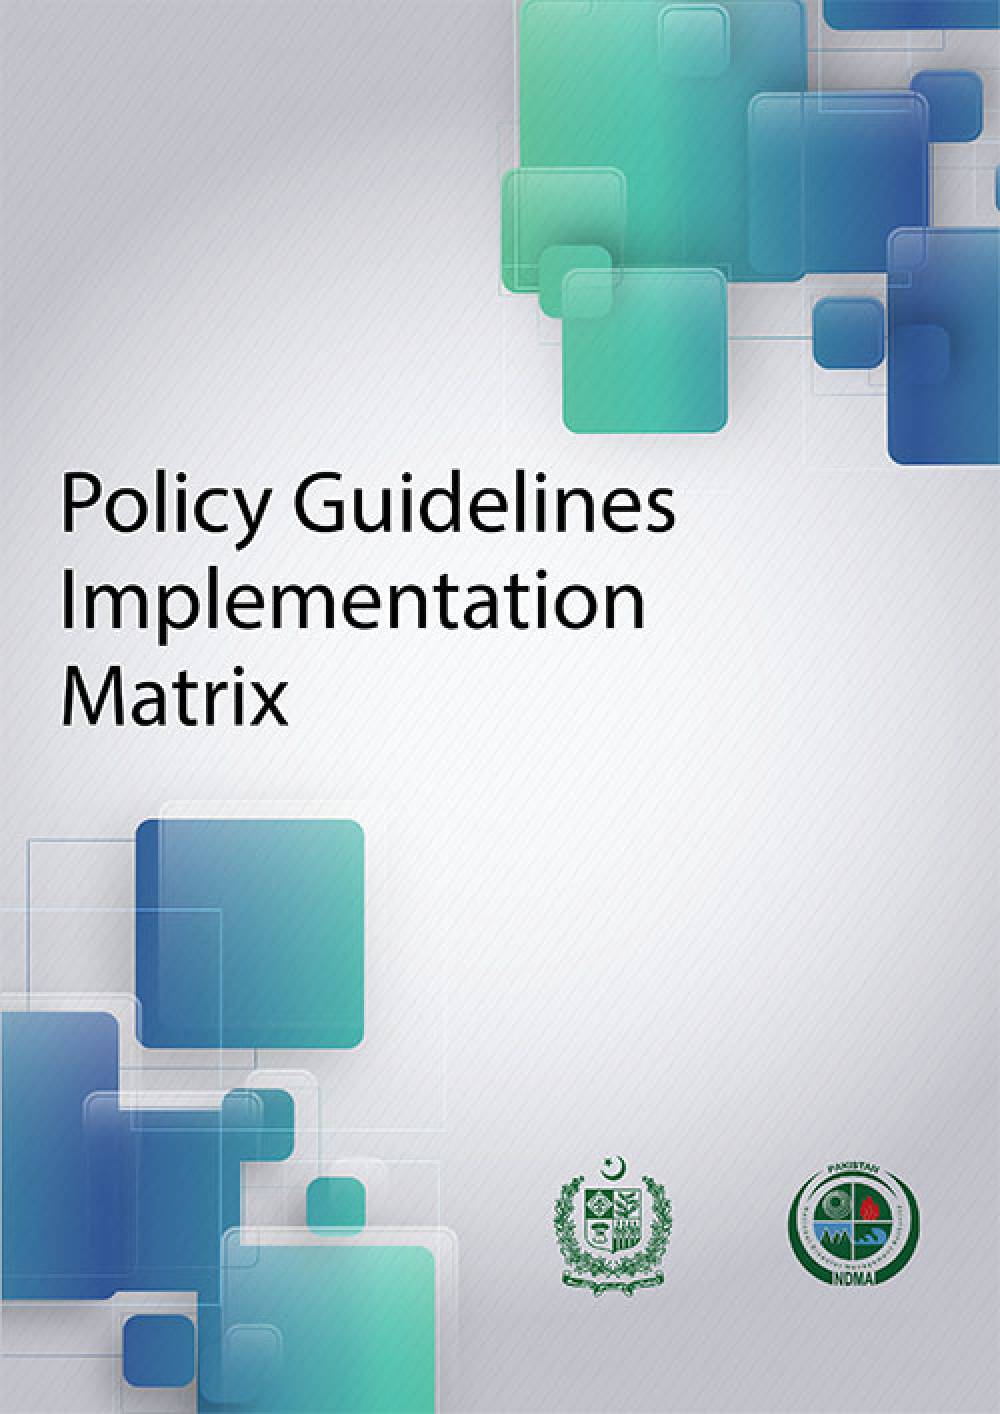 Policy Guidelines Implementation Matrix